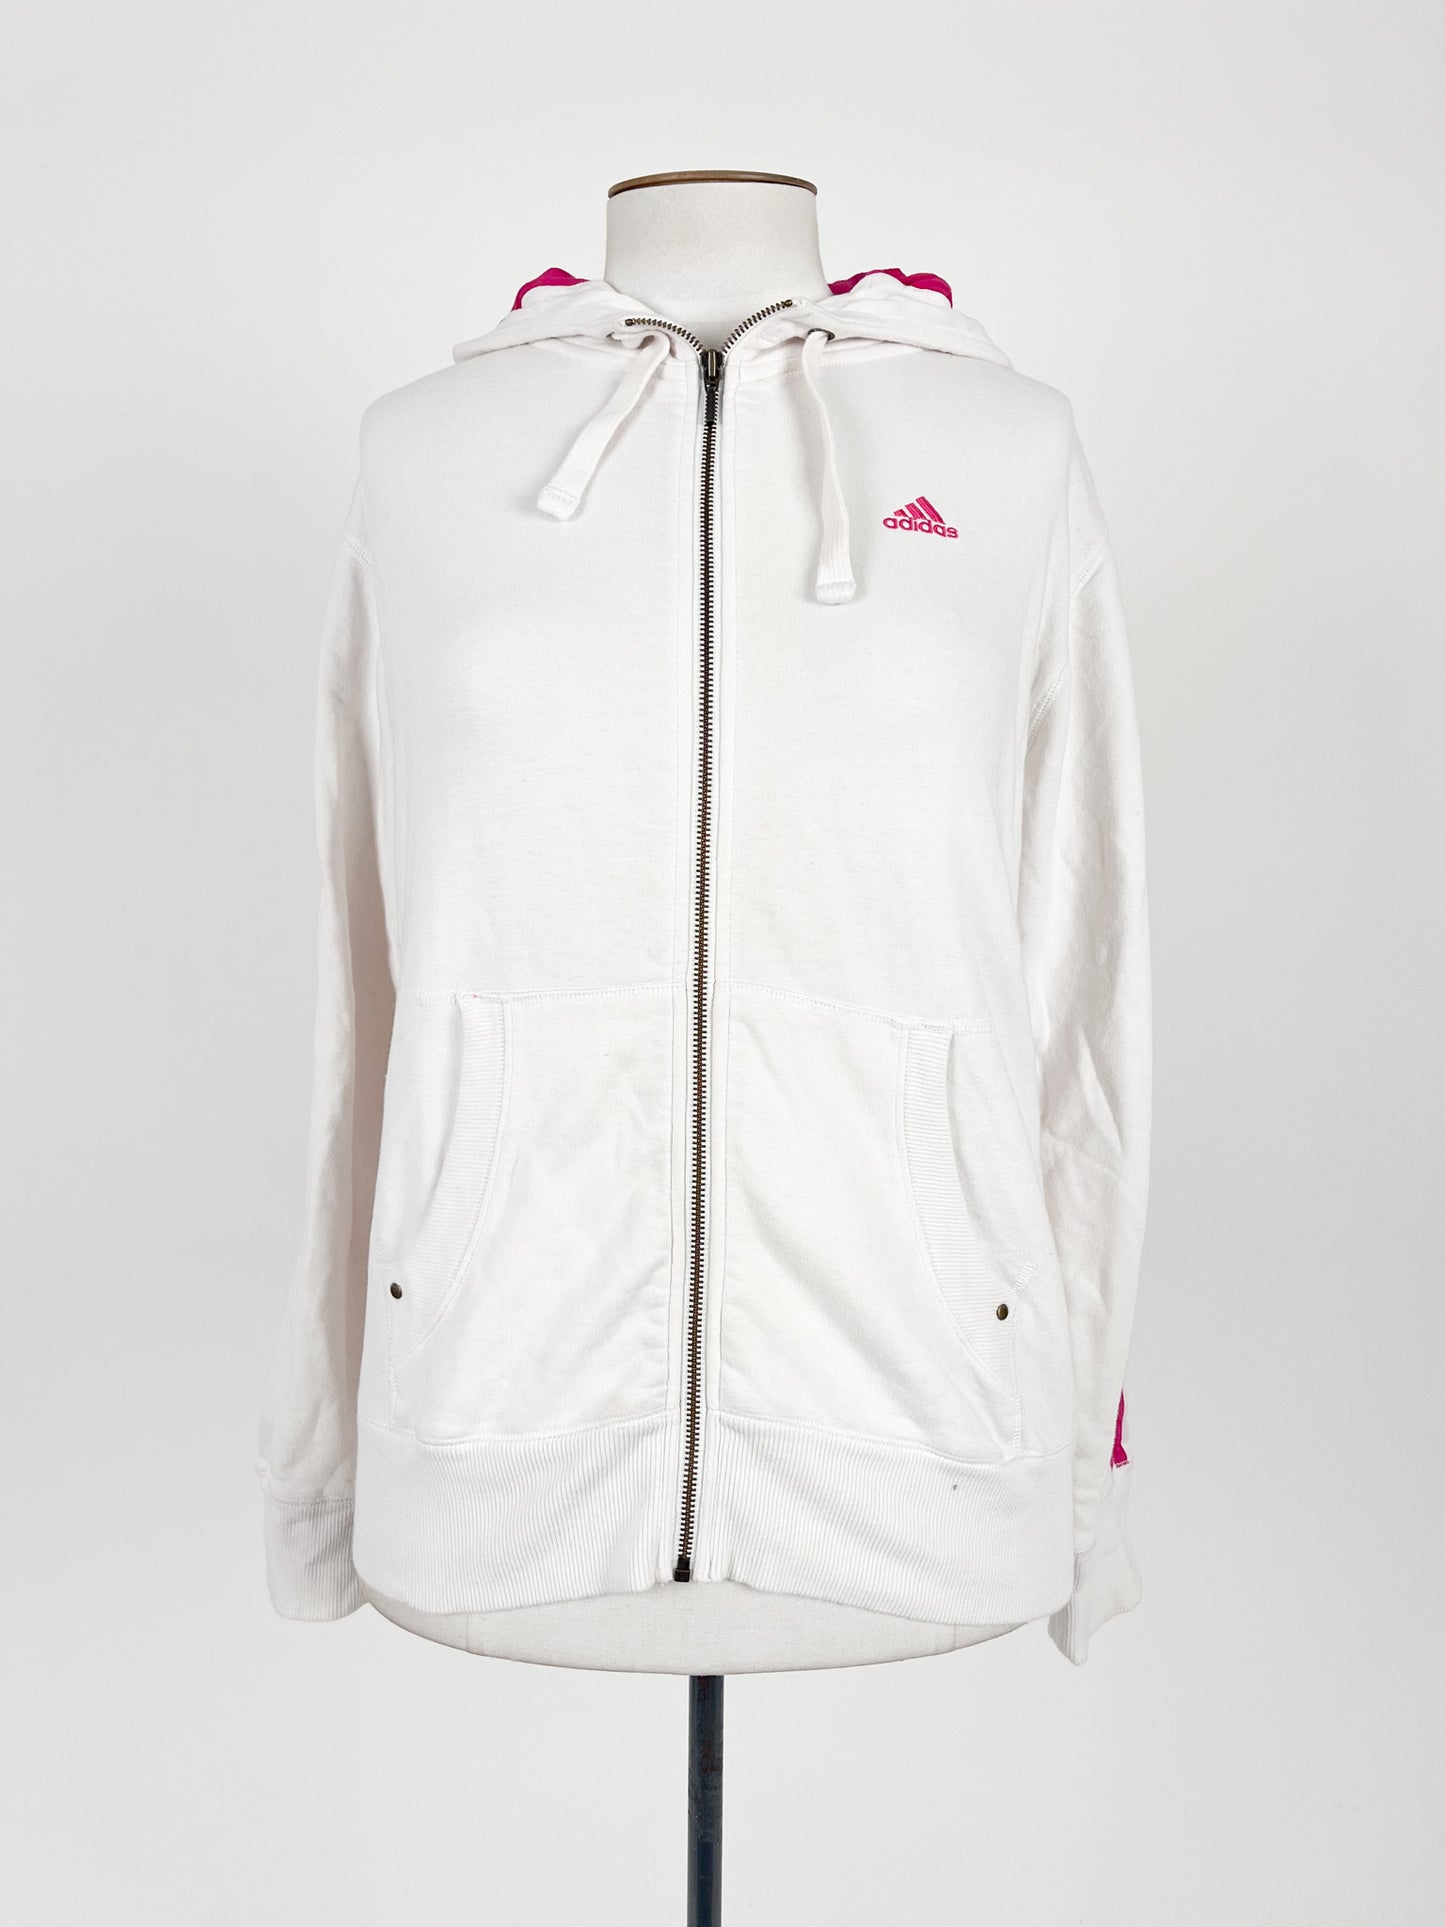 Adidas | White Casual Jumper | Size 16